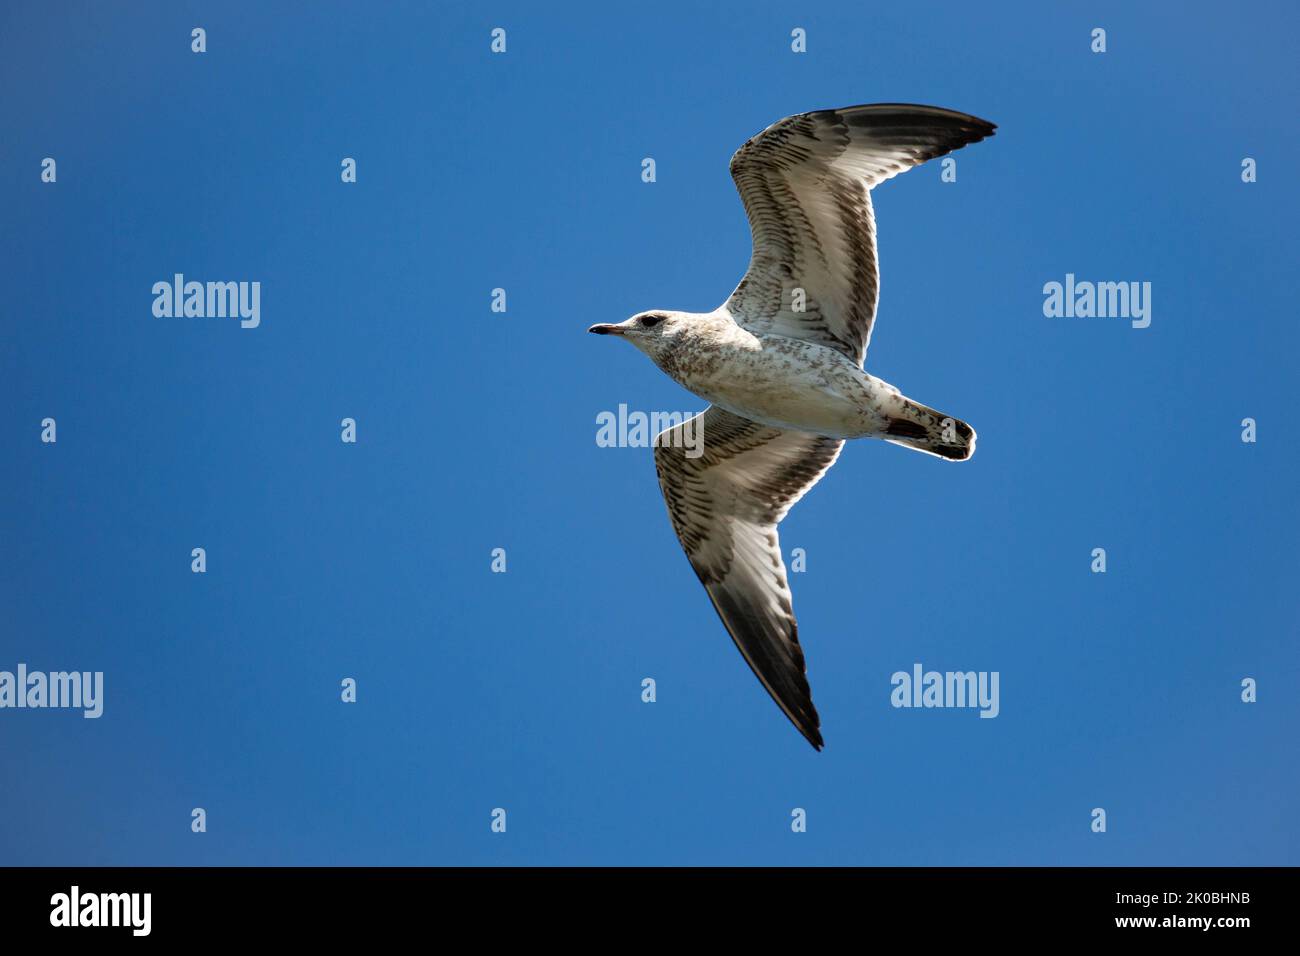 ring-billed gull (Larus delawarensis) immature flying in a blue sky with copy space, horizontal Stock Photo